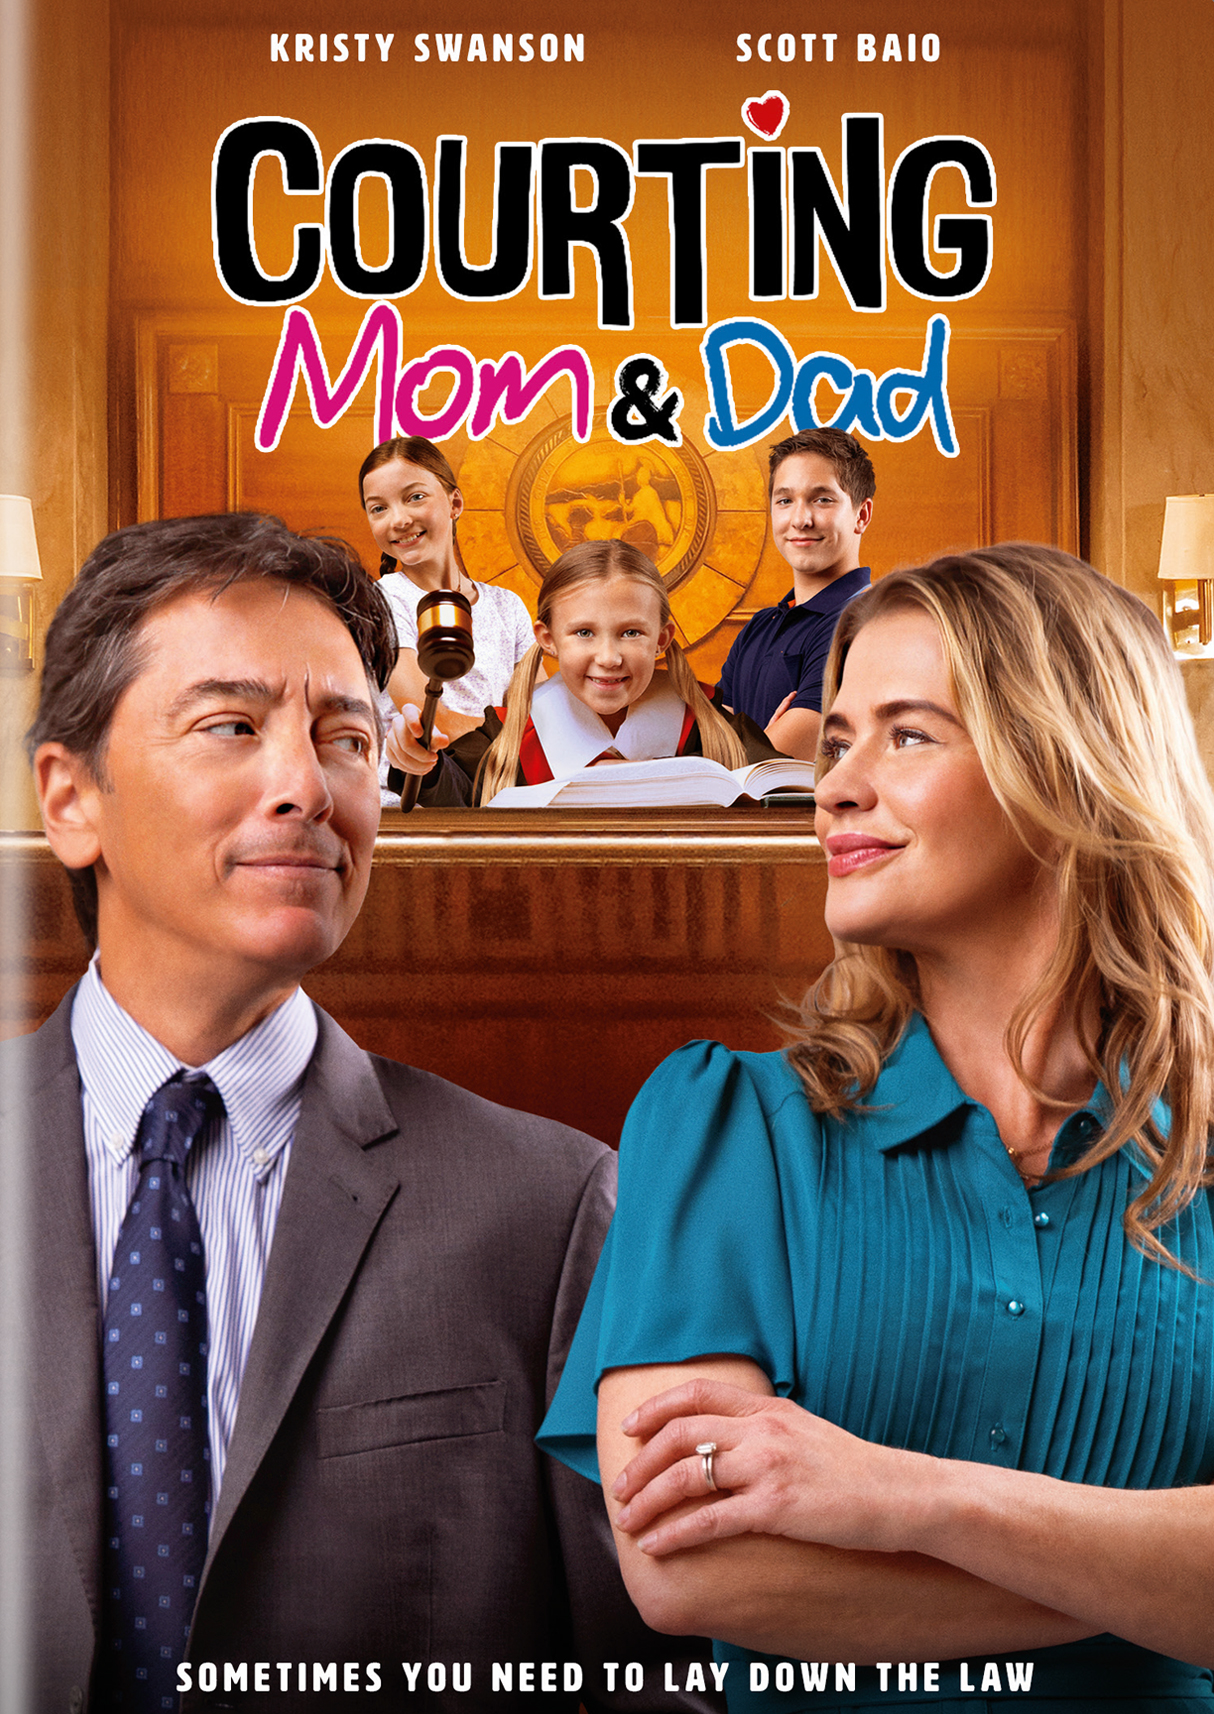 Courting Mom And Dad DVD